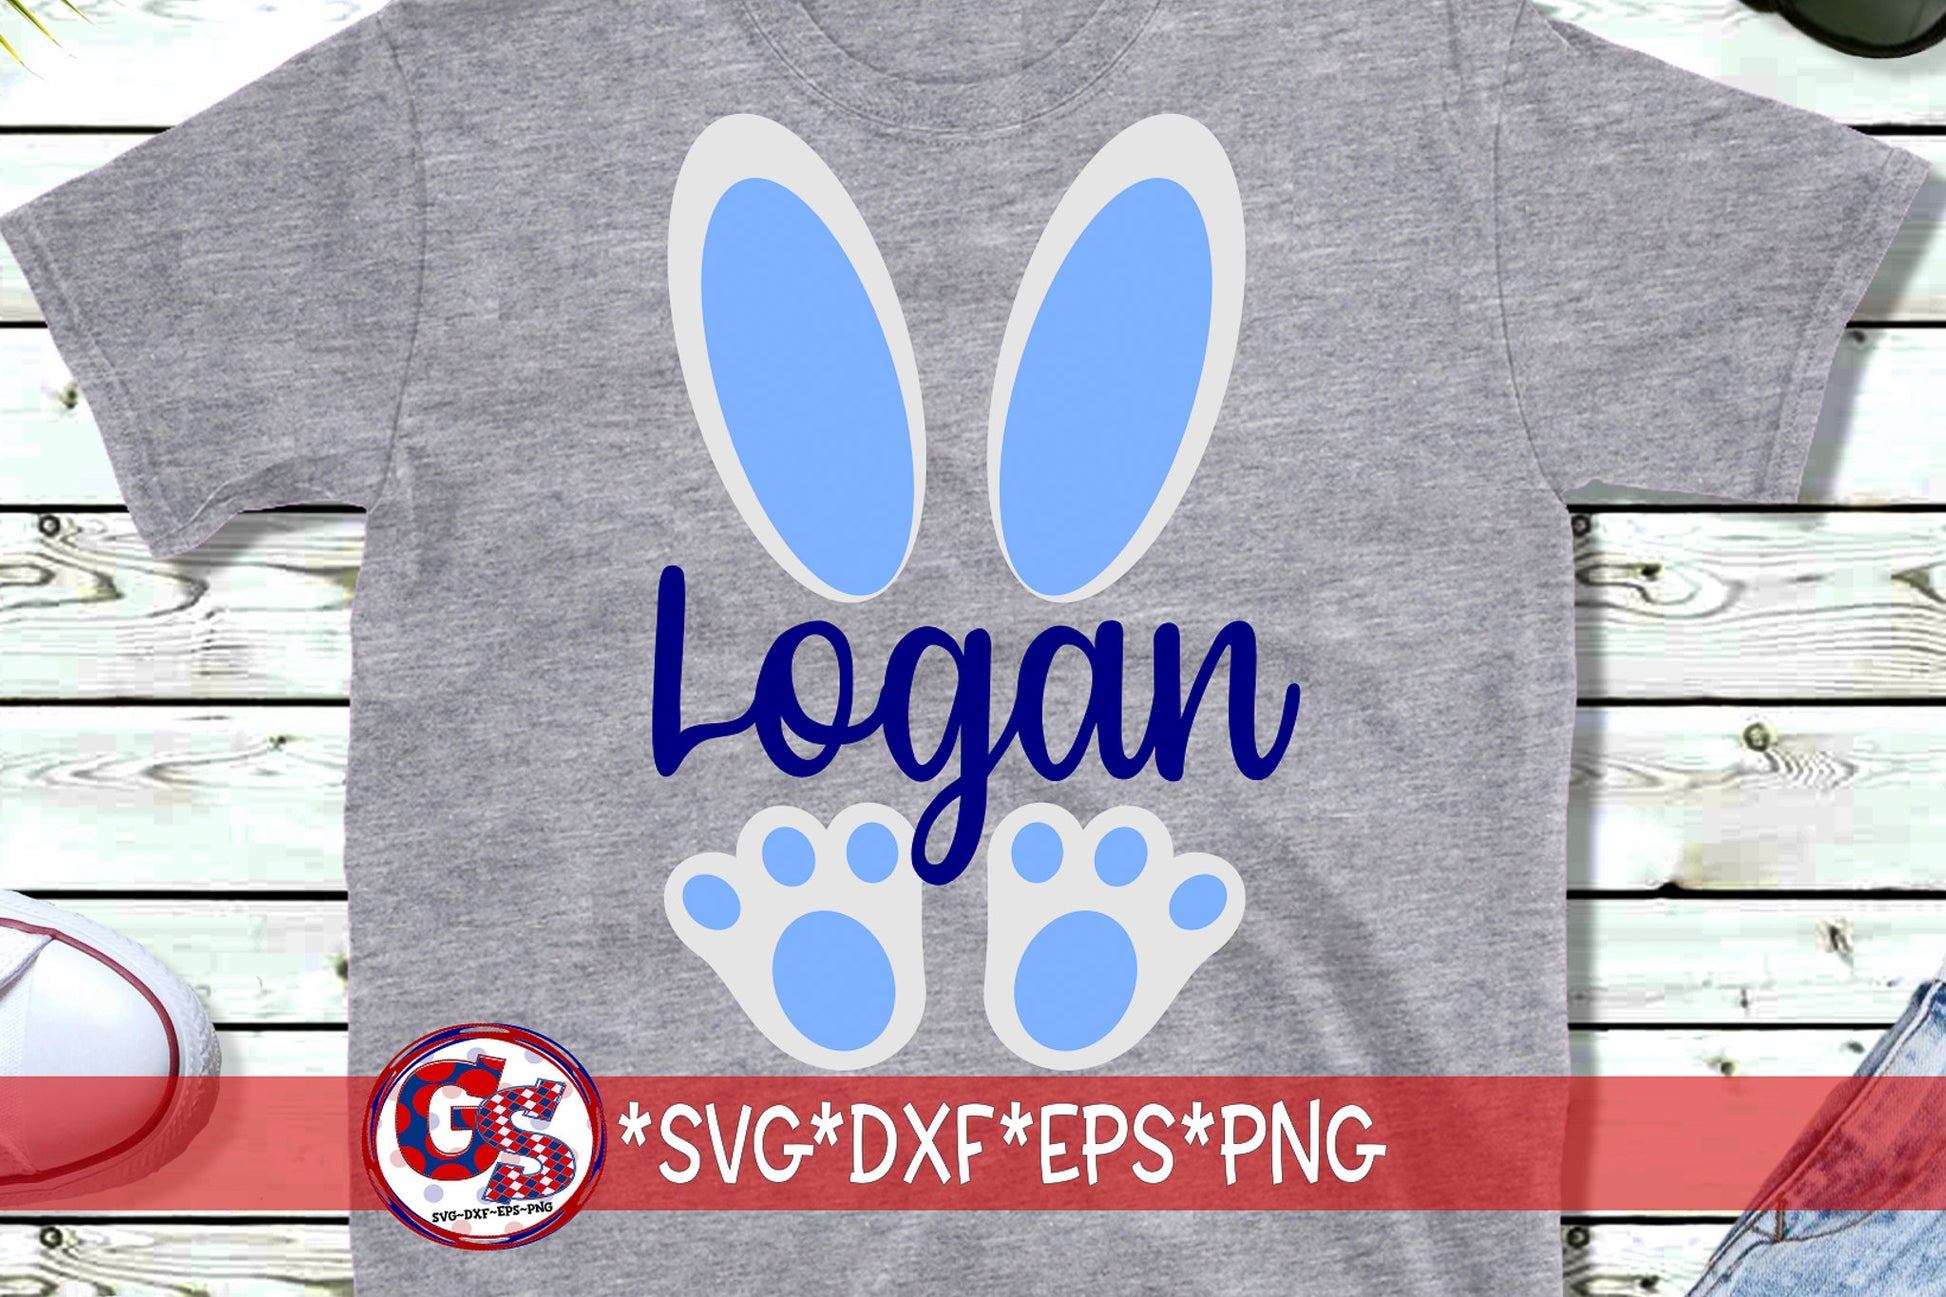 Easter SvG | Boy Bunny Ears and Feet svg dxf eps png Easter SvG | Cotton Tail SvG | Little Miss Easter Bunny SvG | Instant Download Cut File